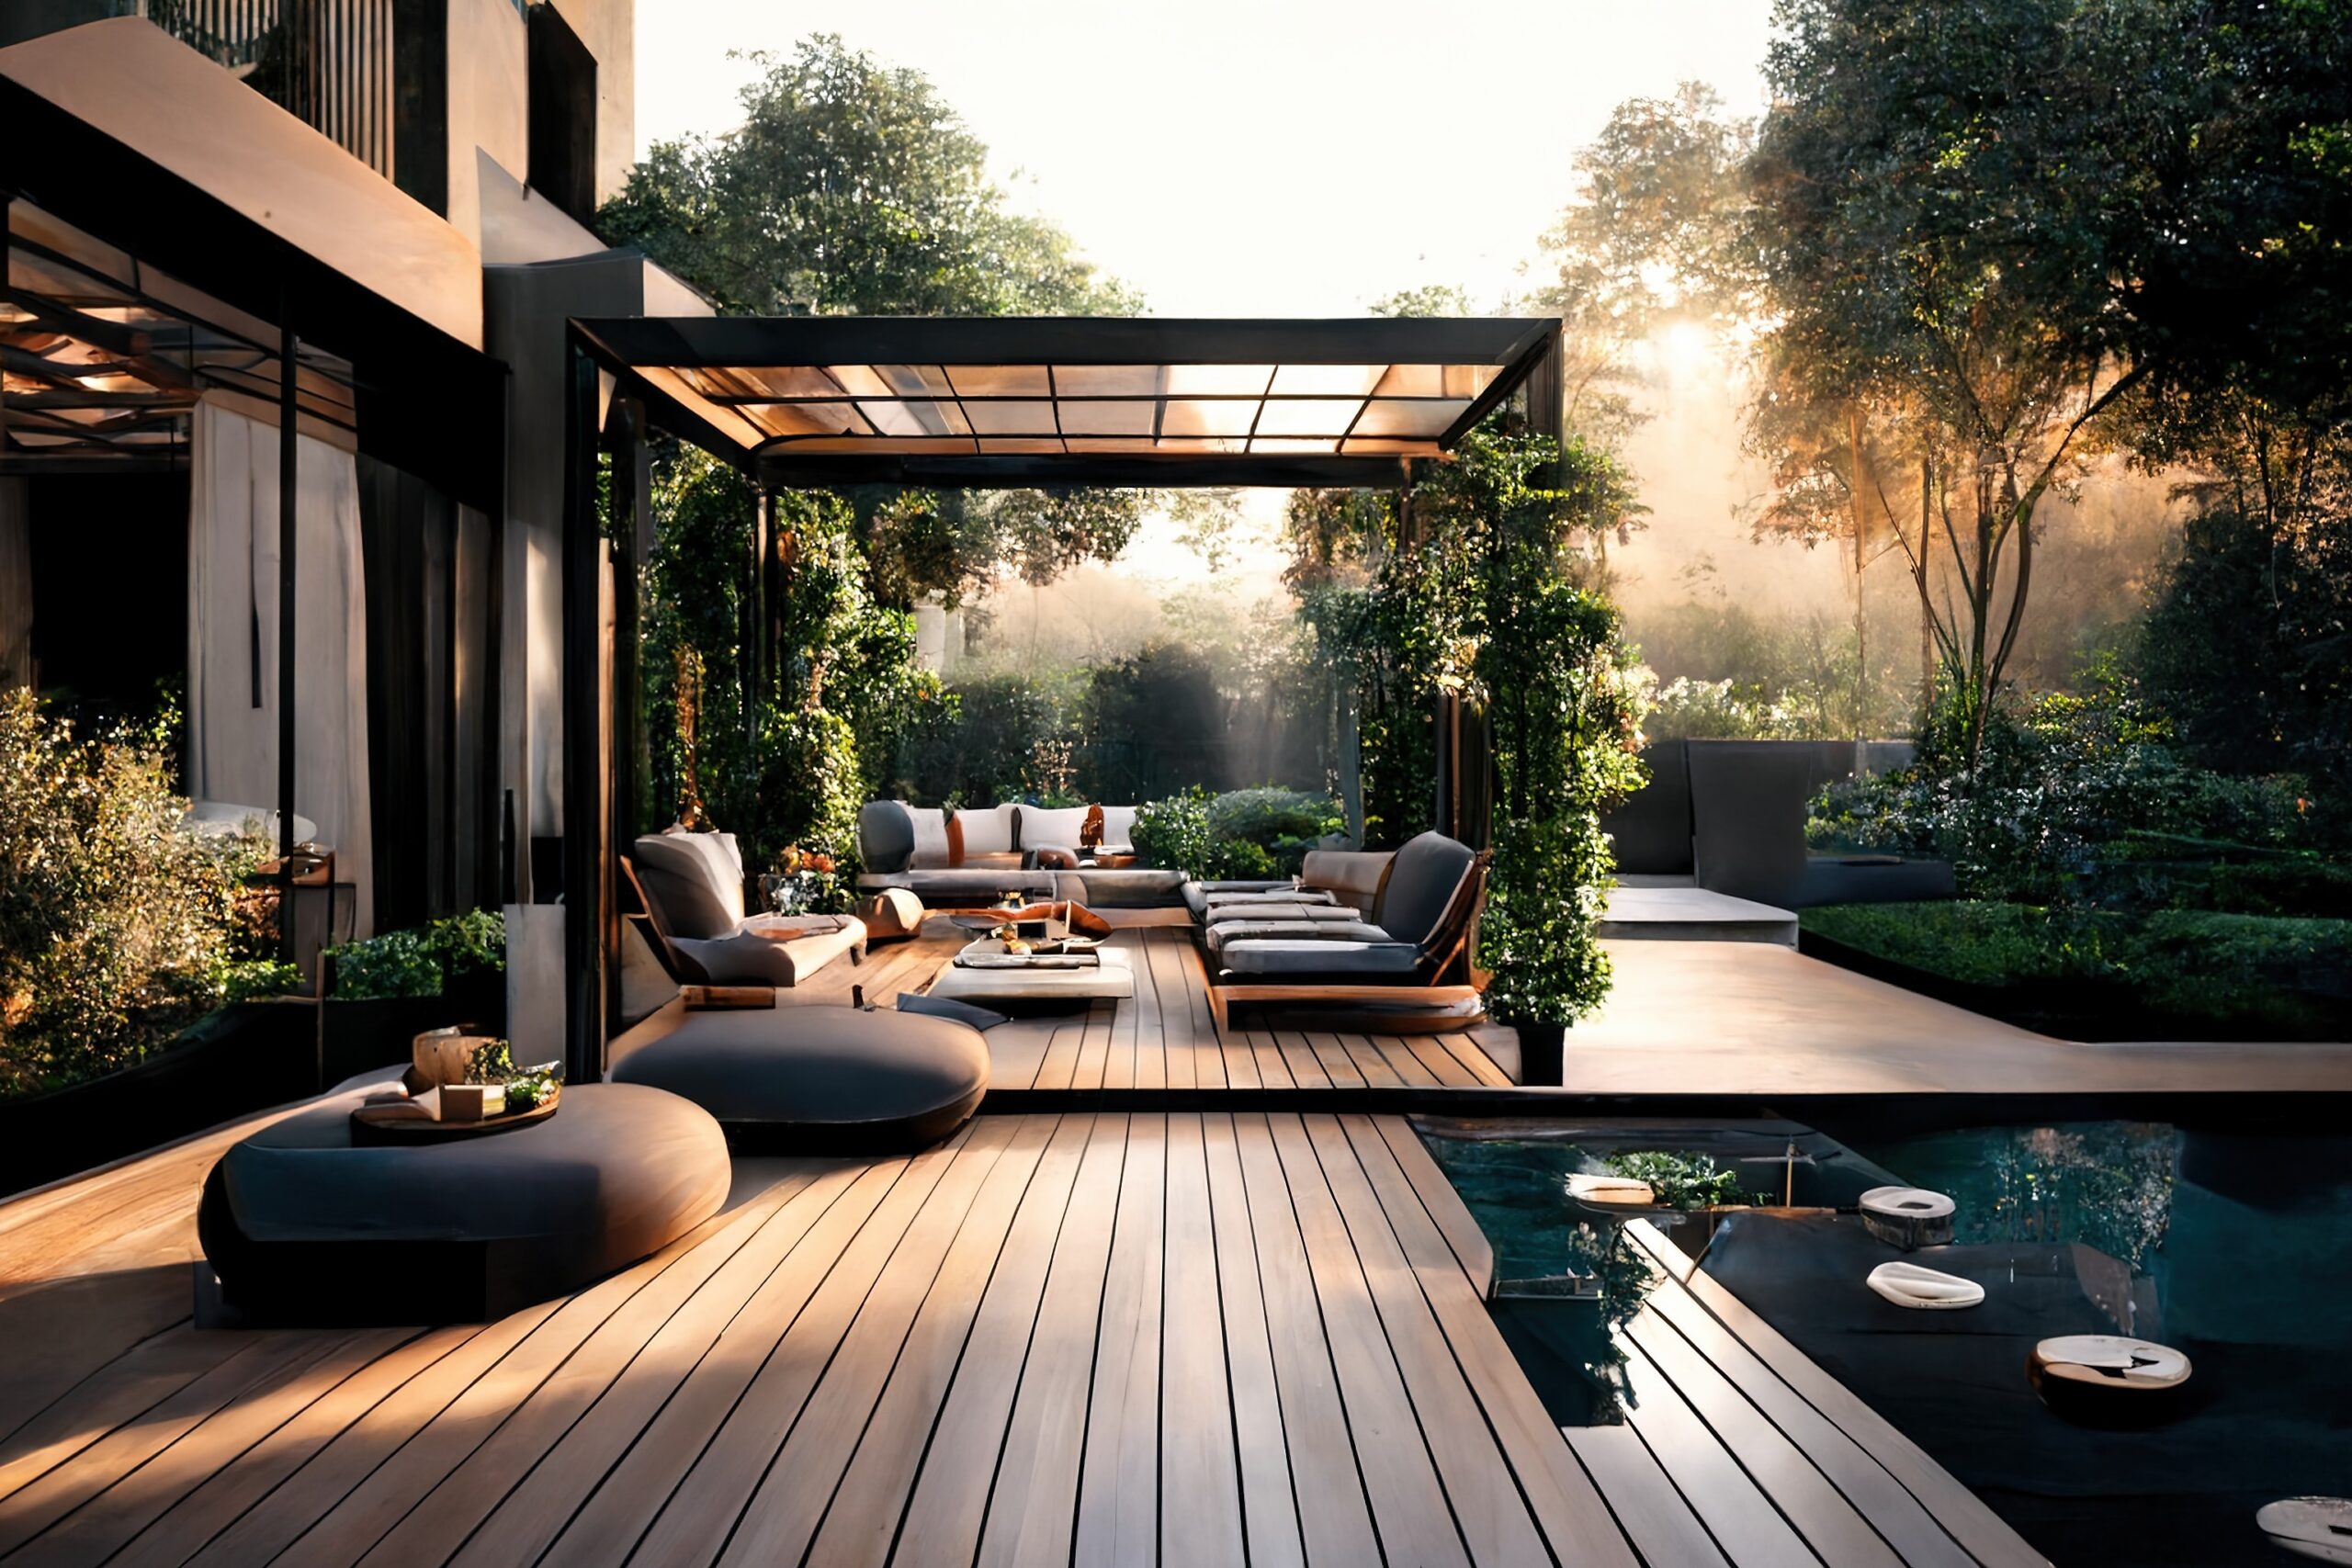 Luxury Living Outdoor Space Interior design of a lavish side out